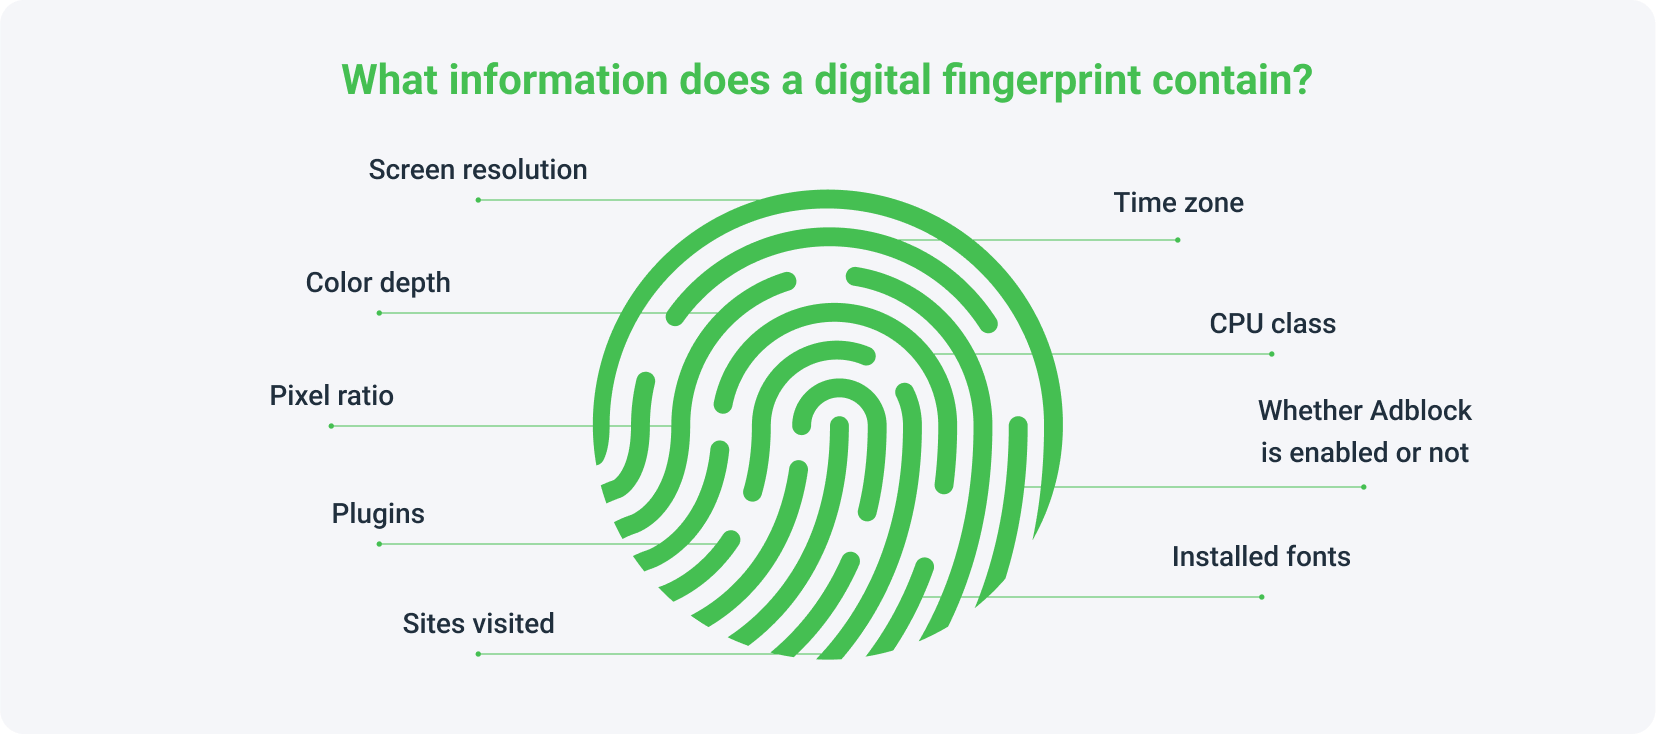 What information does a digital fingerprint contain?